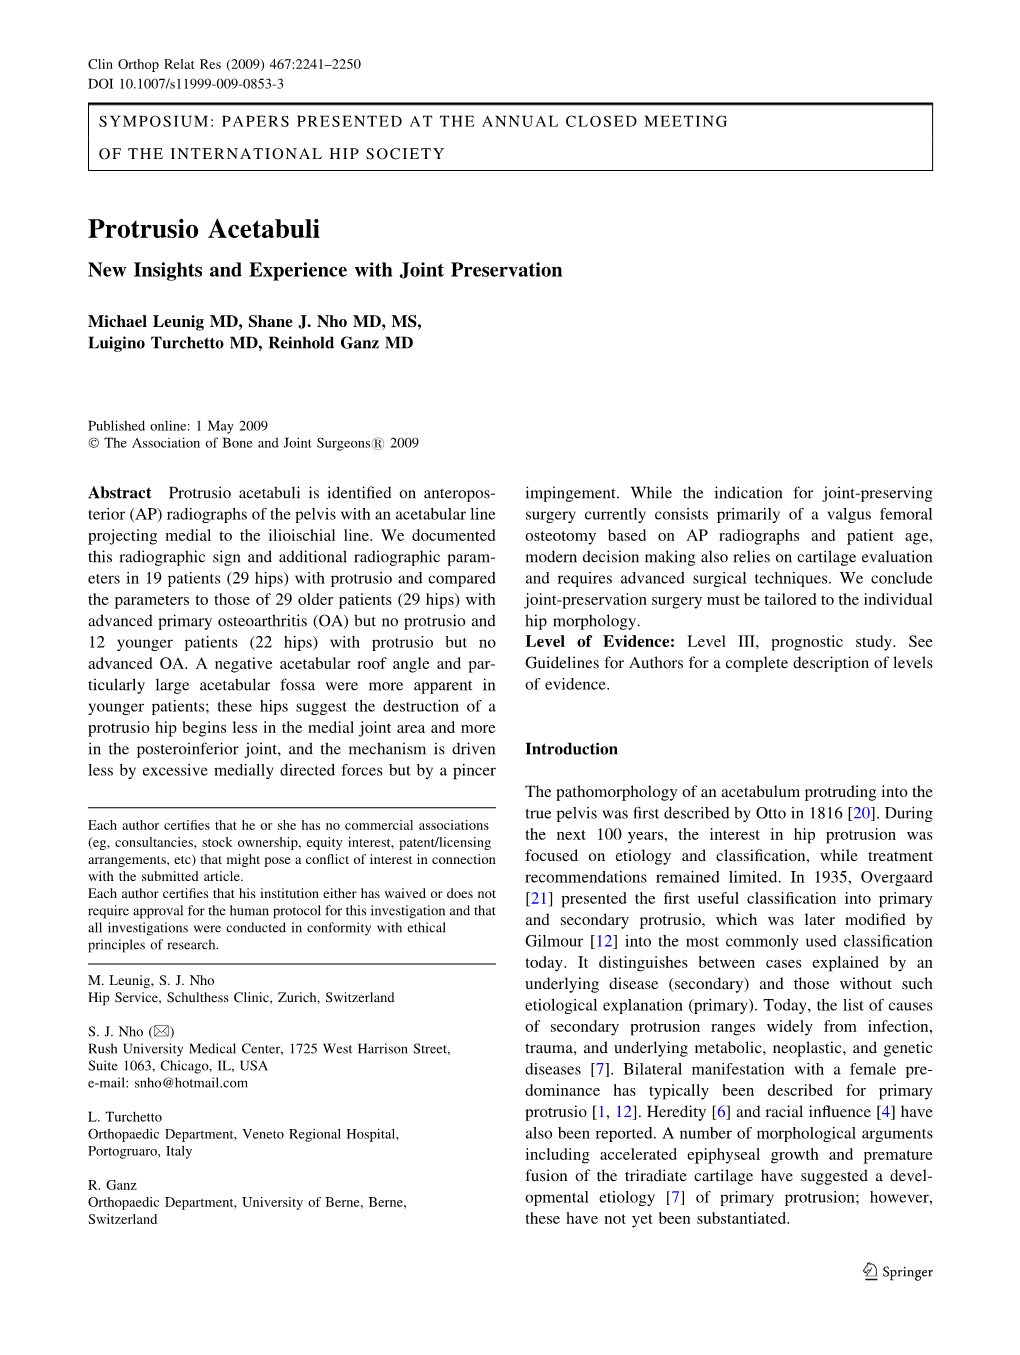 Protrusio Acetabuli New Insights and Experience with Joint Preservation